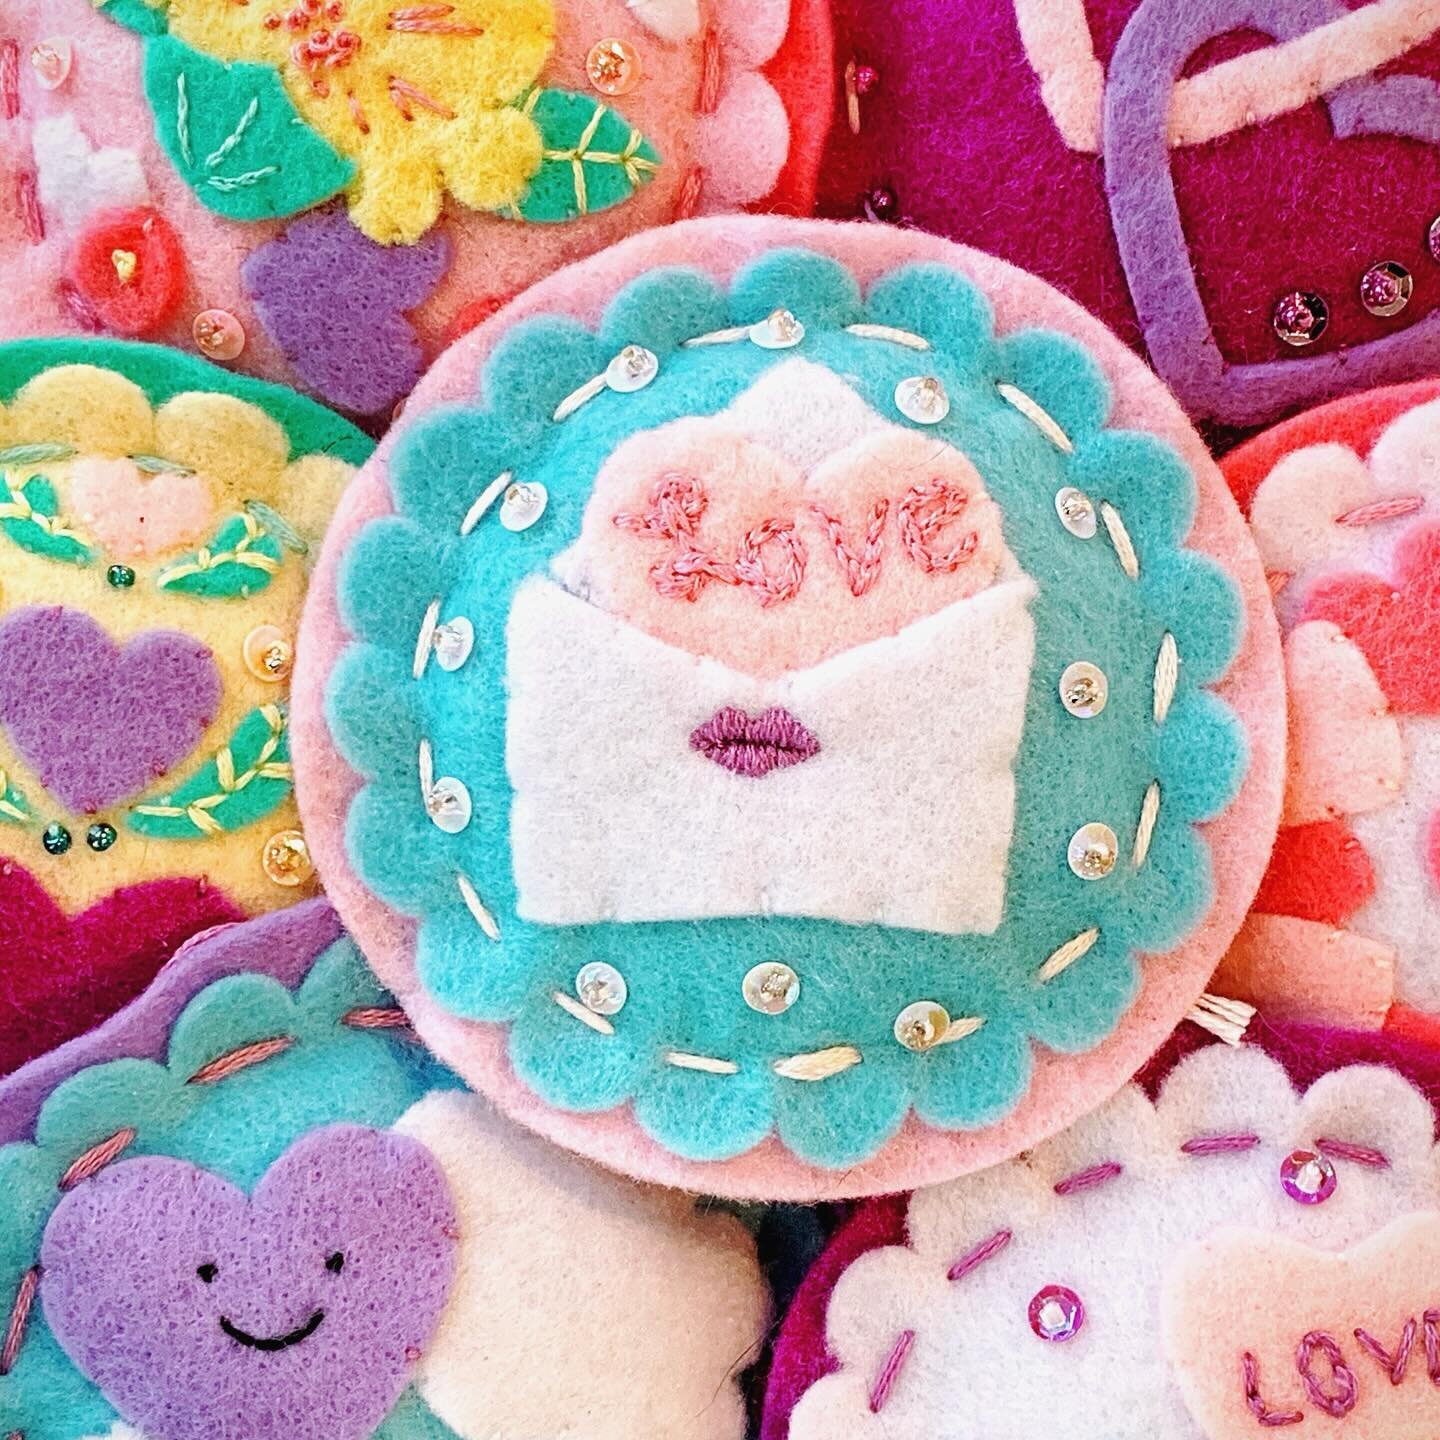 Looking for a one-of-a-kind valentine for your sweetie? We have handmade felt ornaments, notebooks, and cards made with love from local artist christenyates! 💝💌

#offbeatgeneralstore #taylorms #mississippi #pleinairtaylor #oxfordms #watervalleyms #